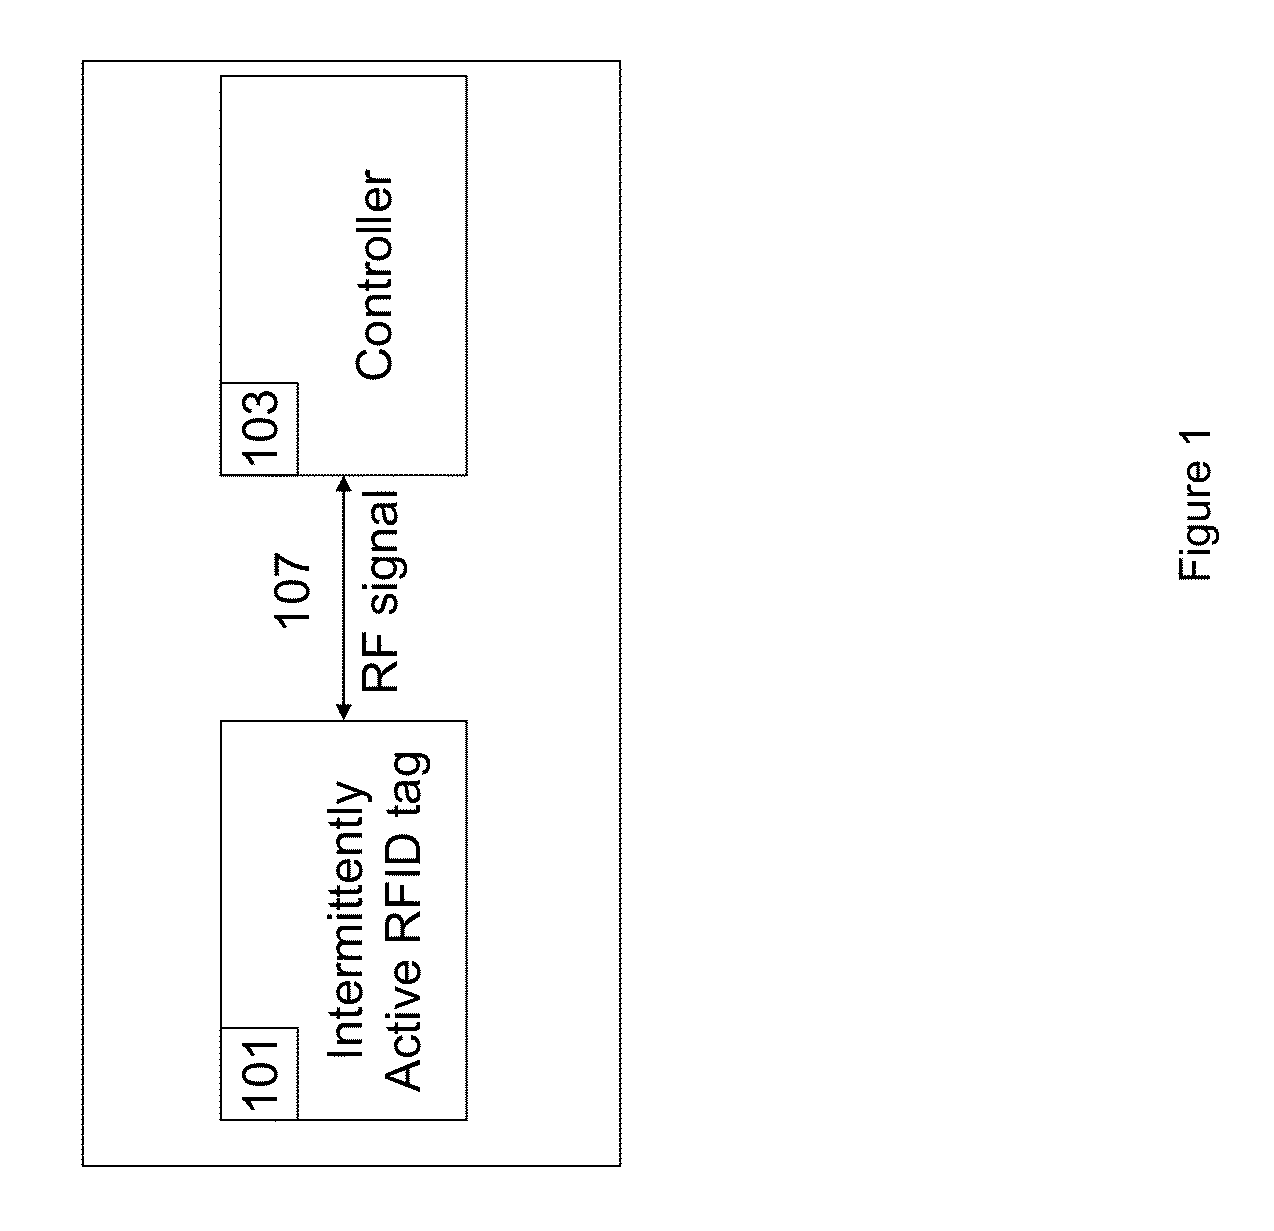 Apparatus and method for locating, tracking, controlling and recognizing tagged objects using active RFID technology